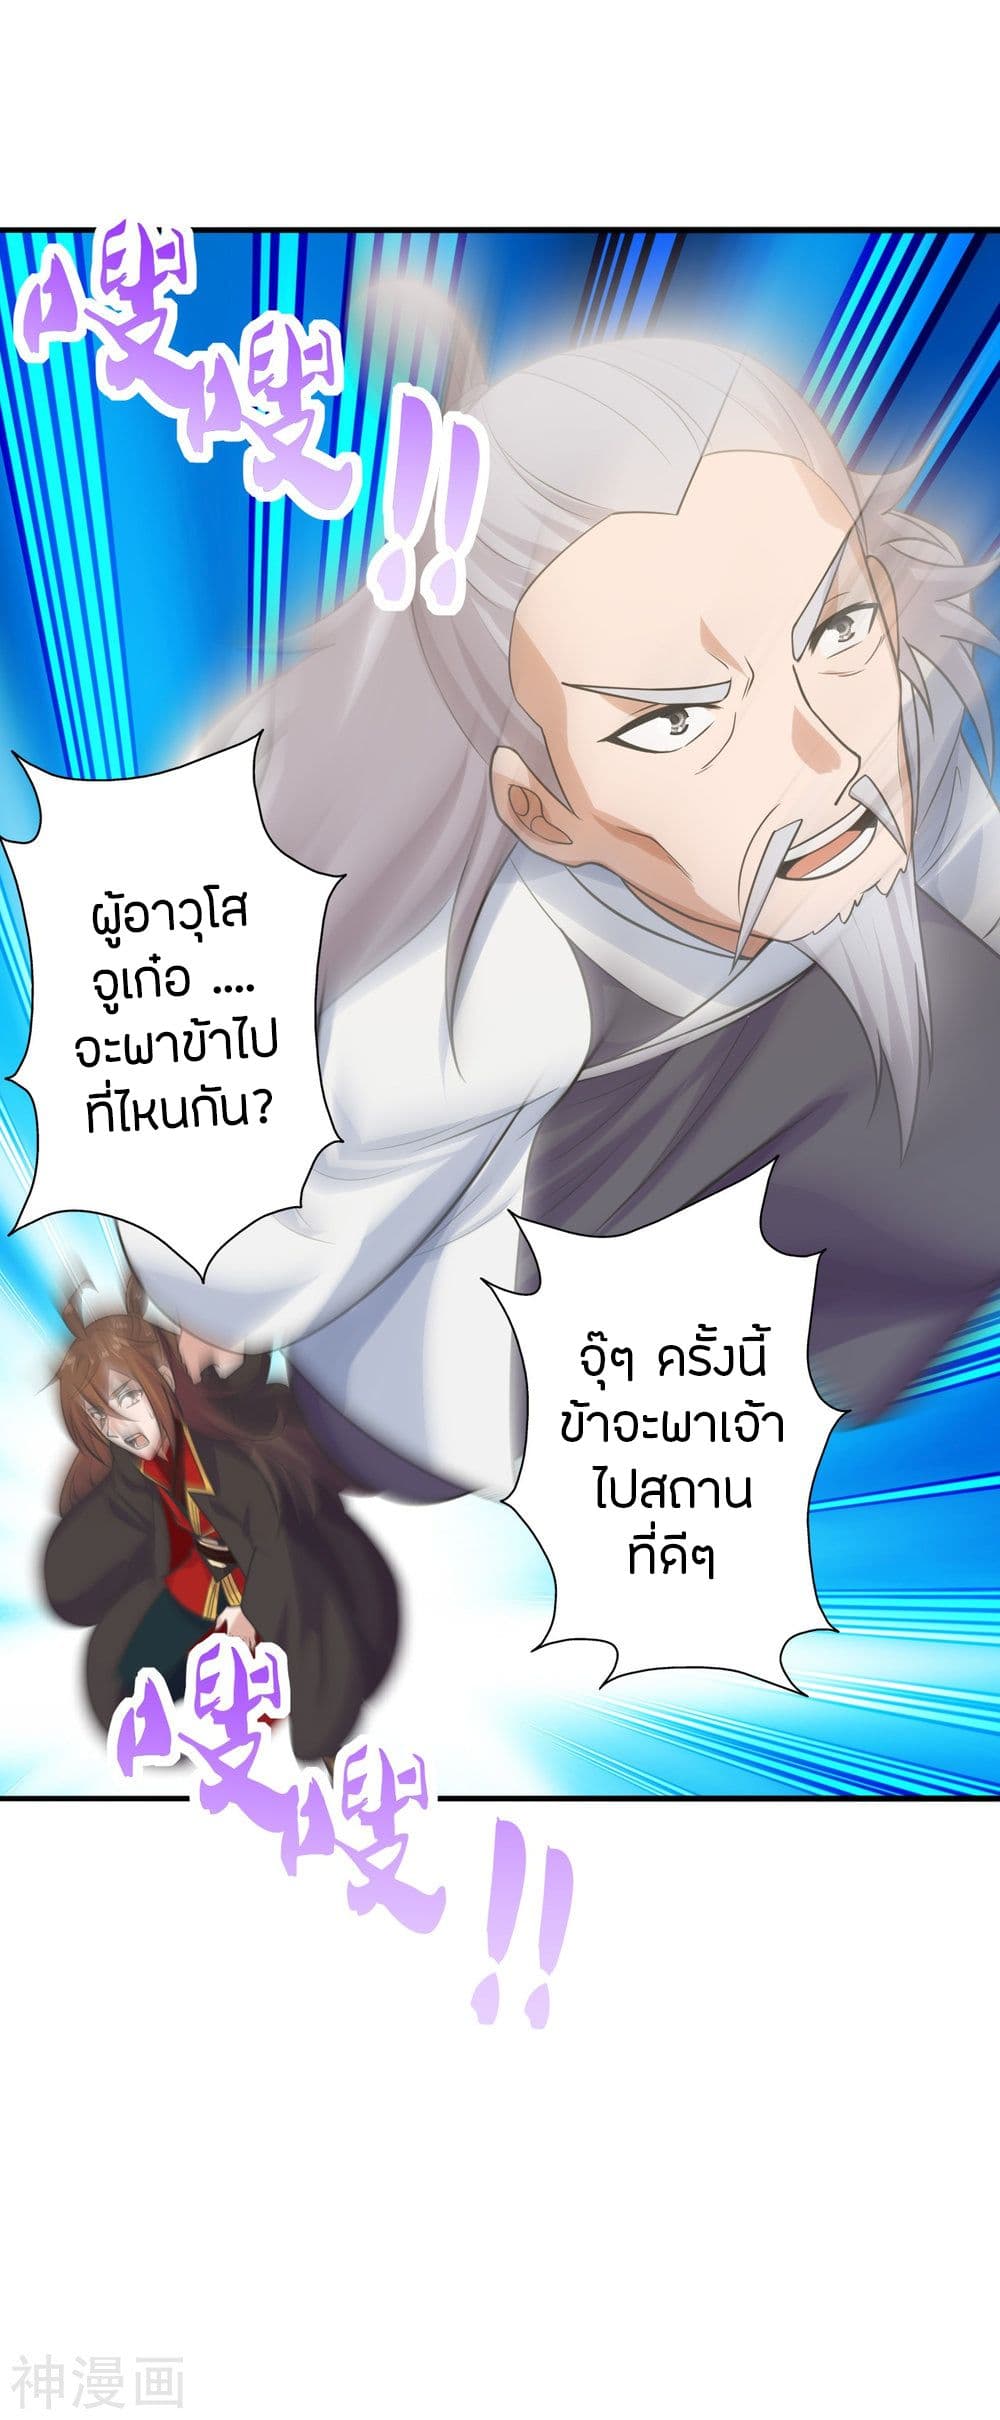 Banished Disciple's Counterattack เธเธฑเธเธฃเธเธฃเธฃเธ”เธดเน€เธเธตเธขเธเธขเธธเธ—เธ 239 (11)